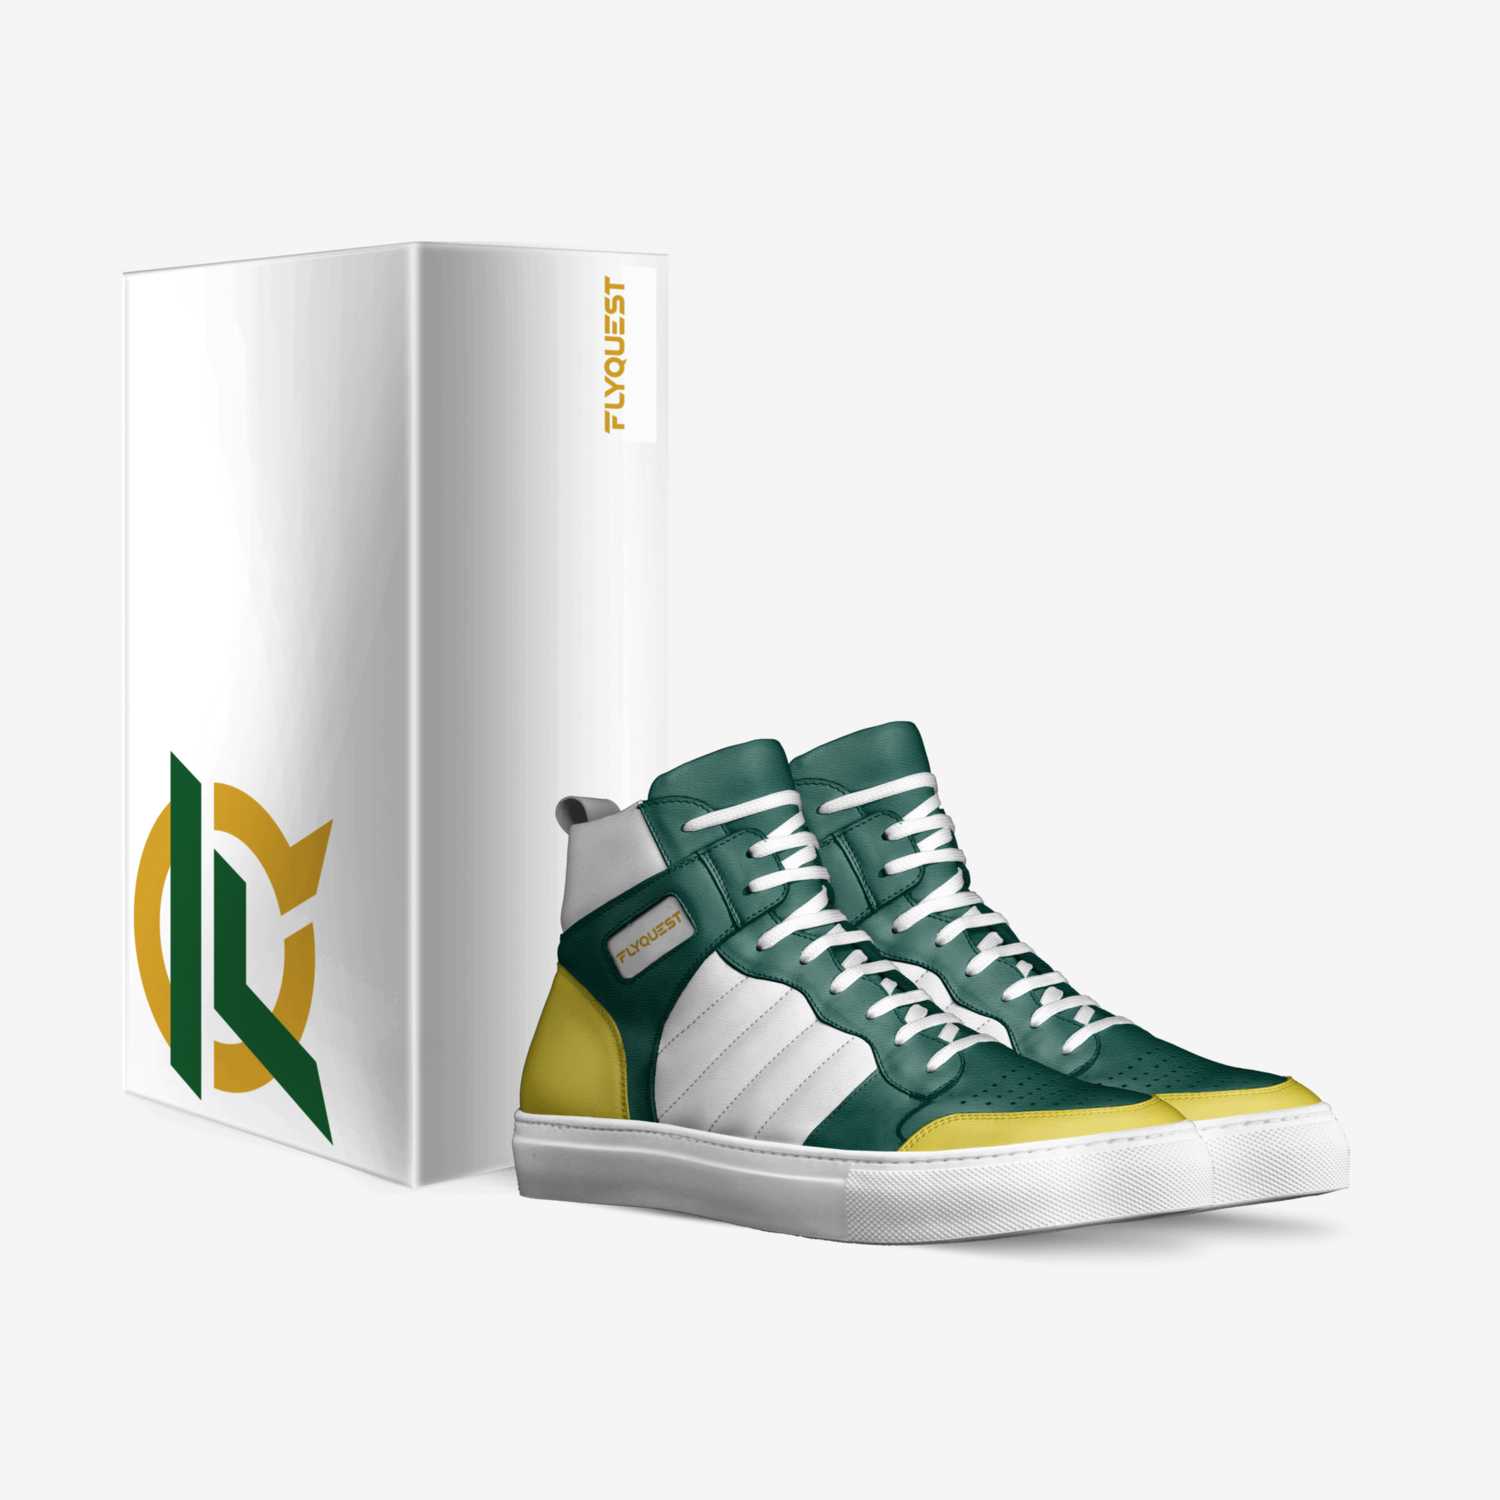 FlyQuest v1 custom made in Italy shoes by Jeffrey Hoang | Box view